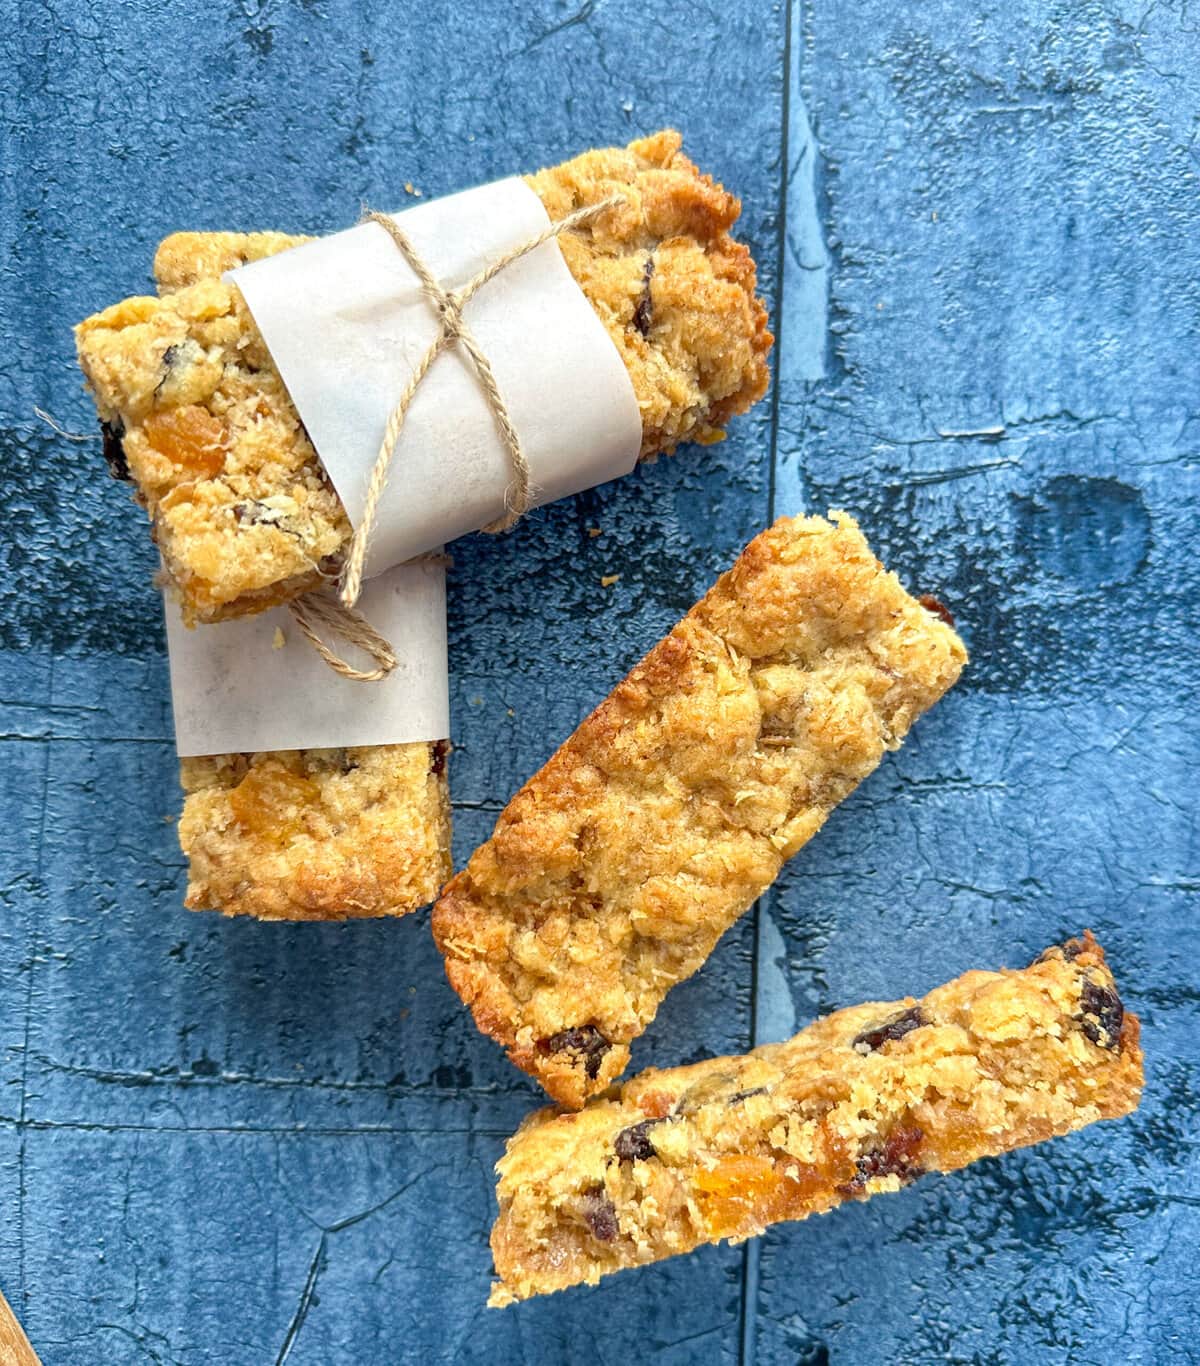 Meusli Bars or Energy bars wrapped in baking paper and twine